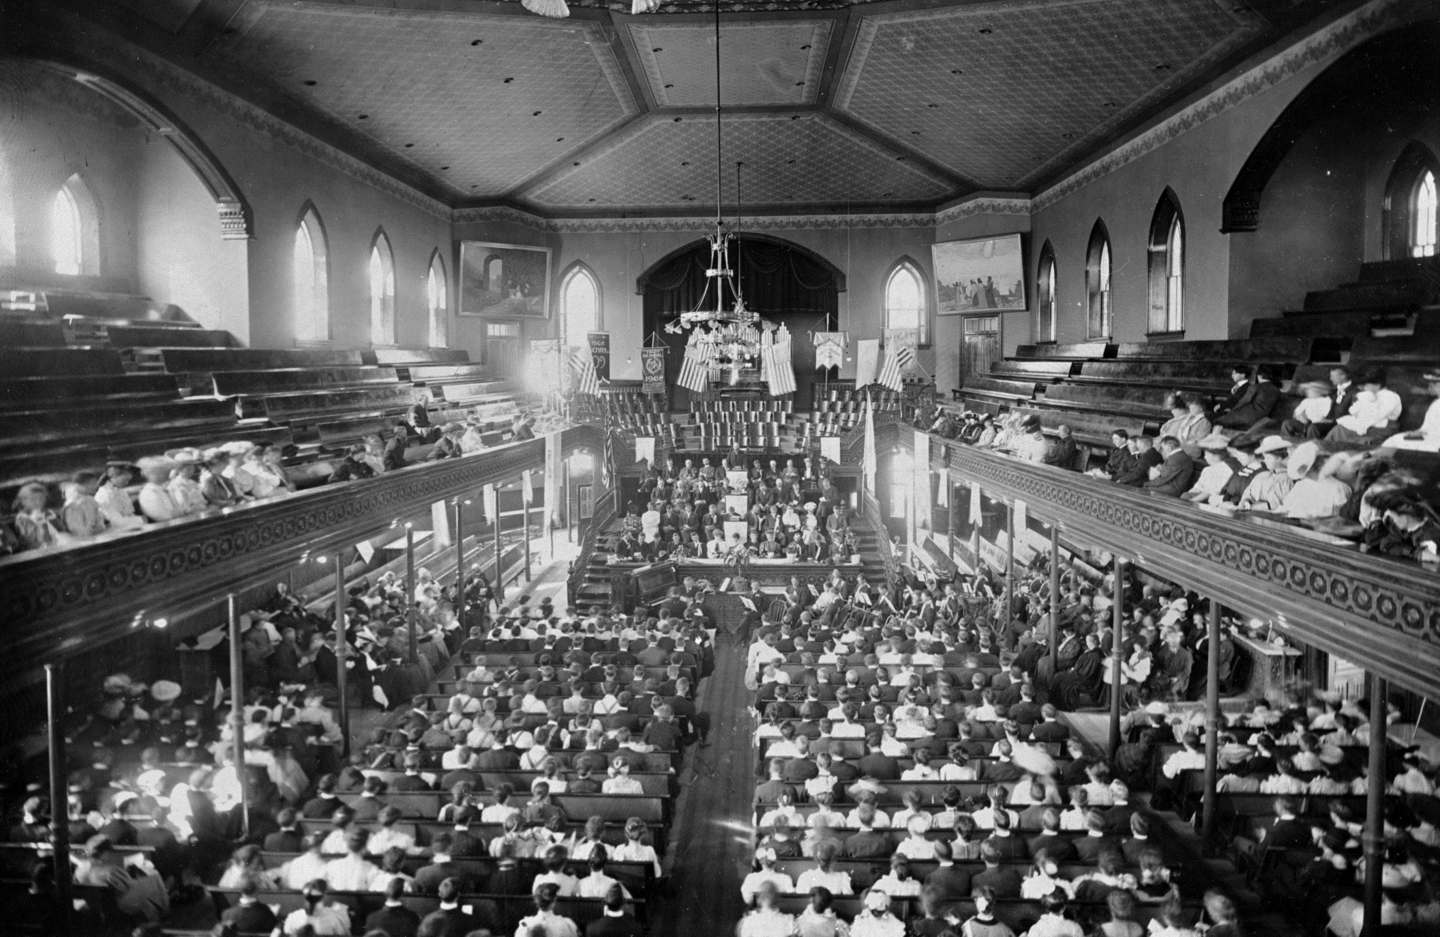 An open room with a large congregation of people sitting in benches.